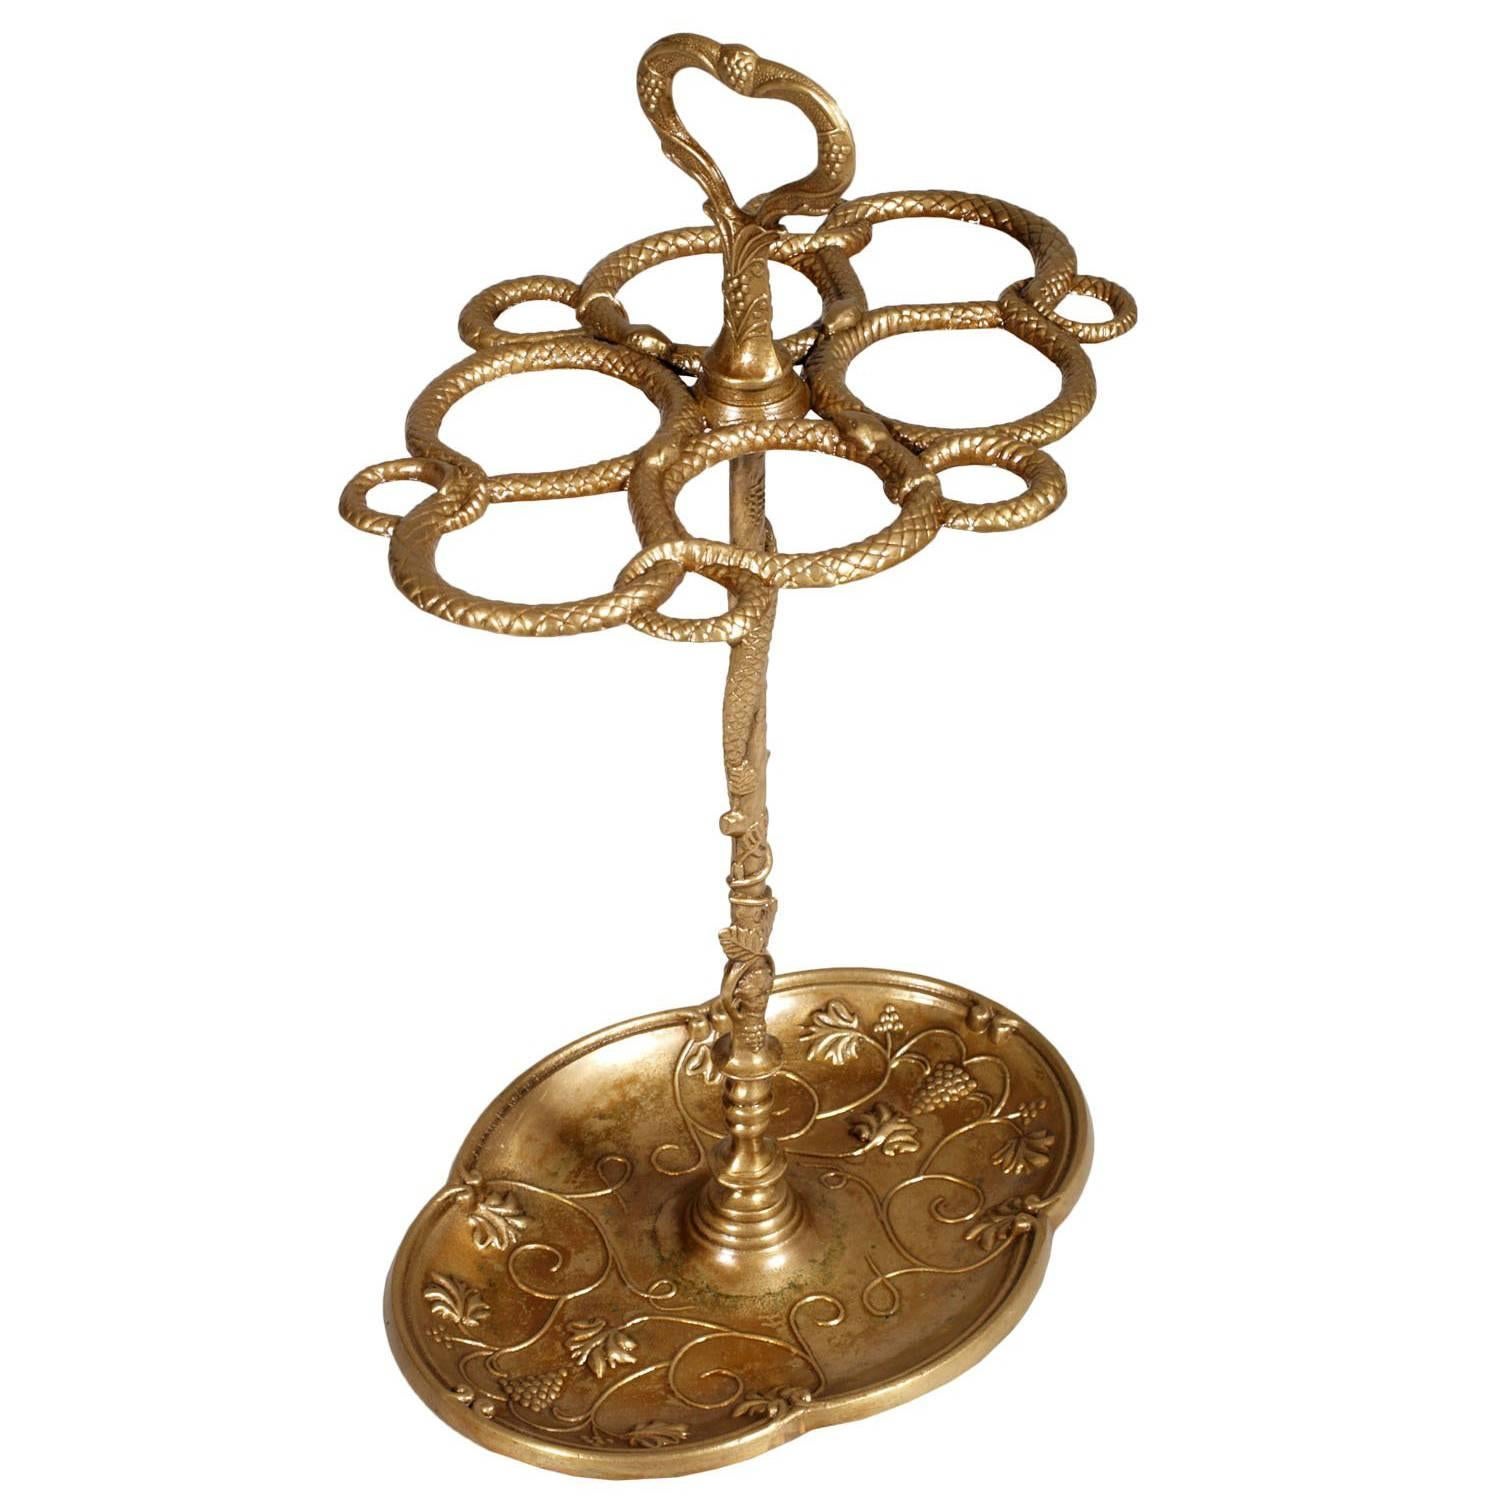 Art Nouveau Gilded Bronz Umbrella Stand Richly Decorated Snakes and Floral Motif